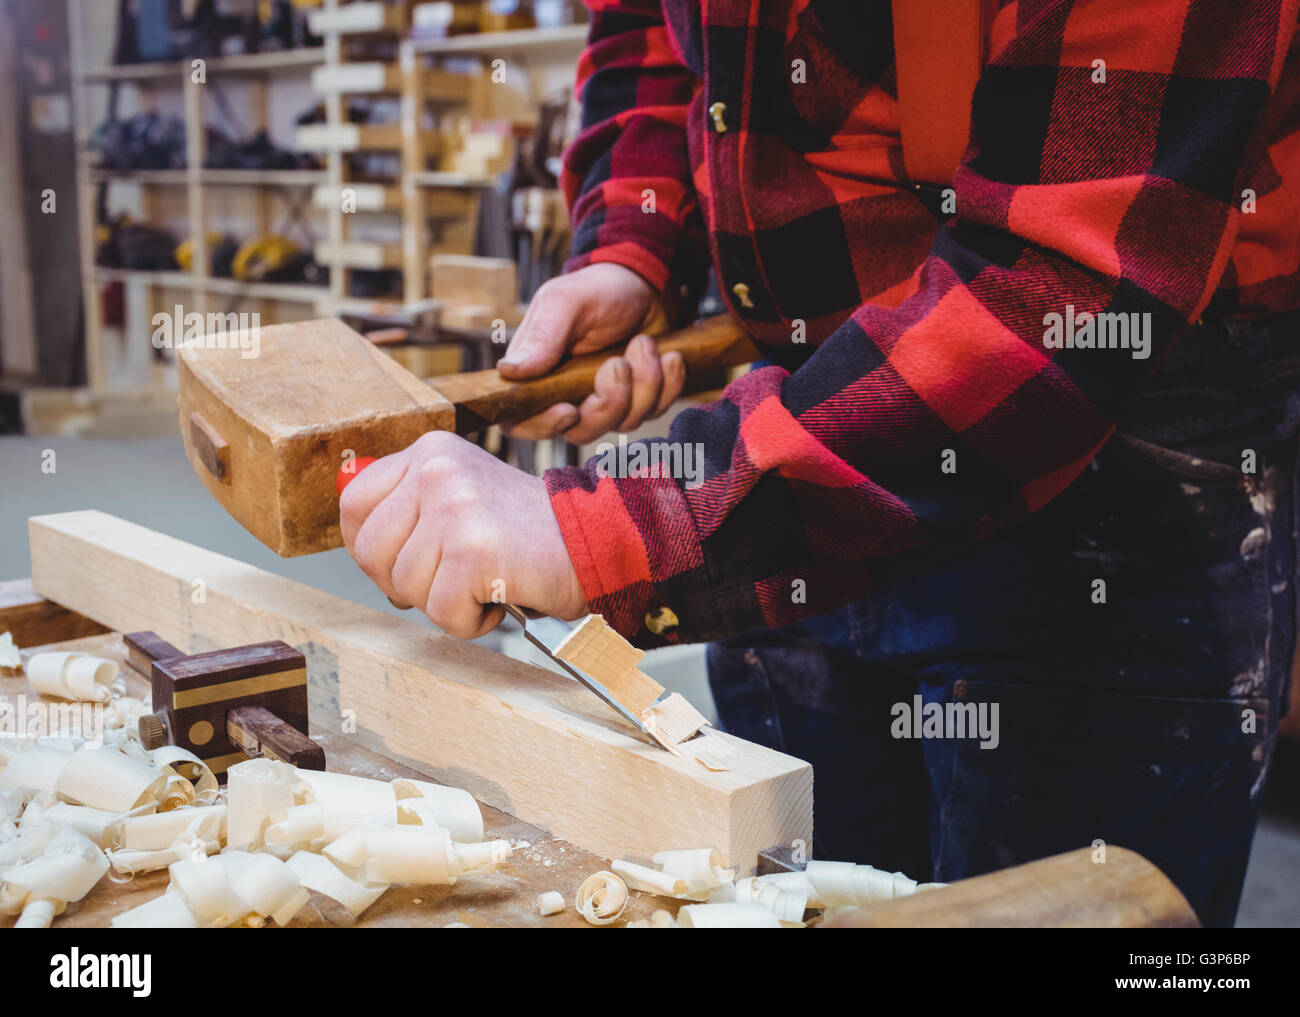 Carpenter working on a wooden plan with an hammer Stock Photo